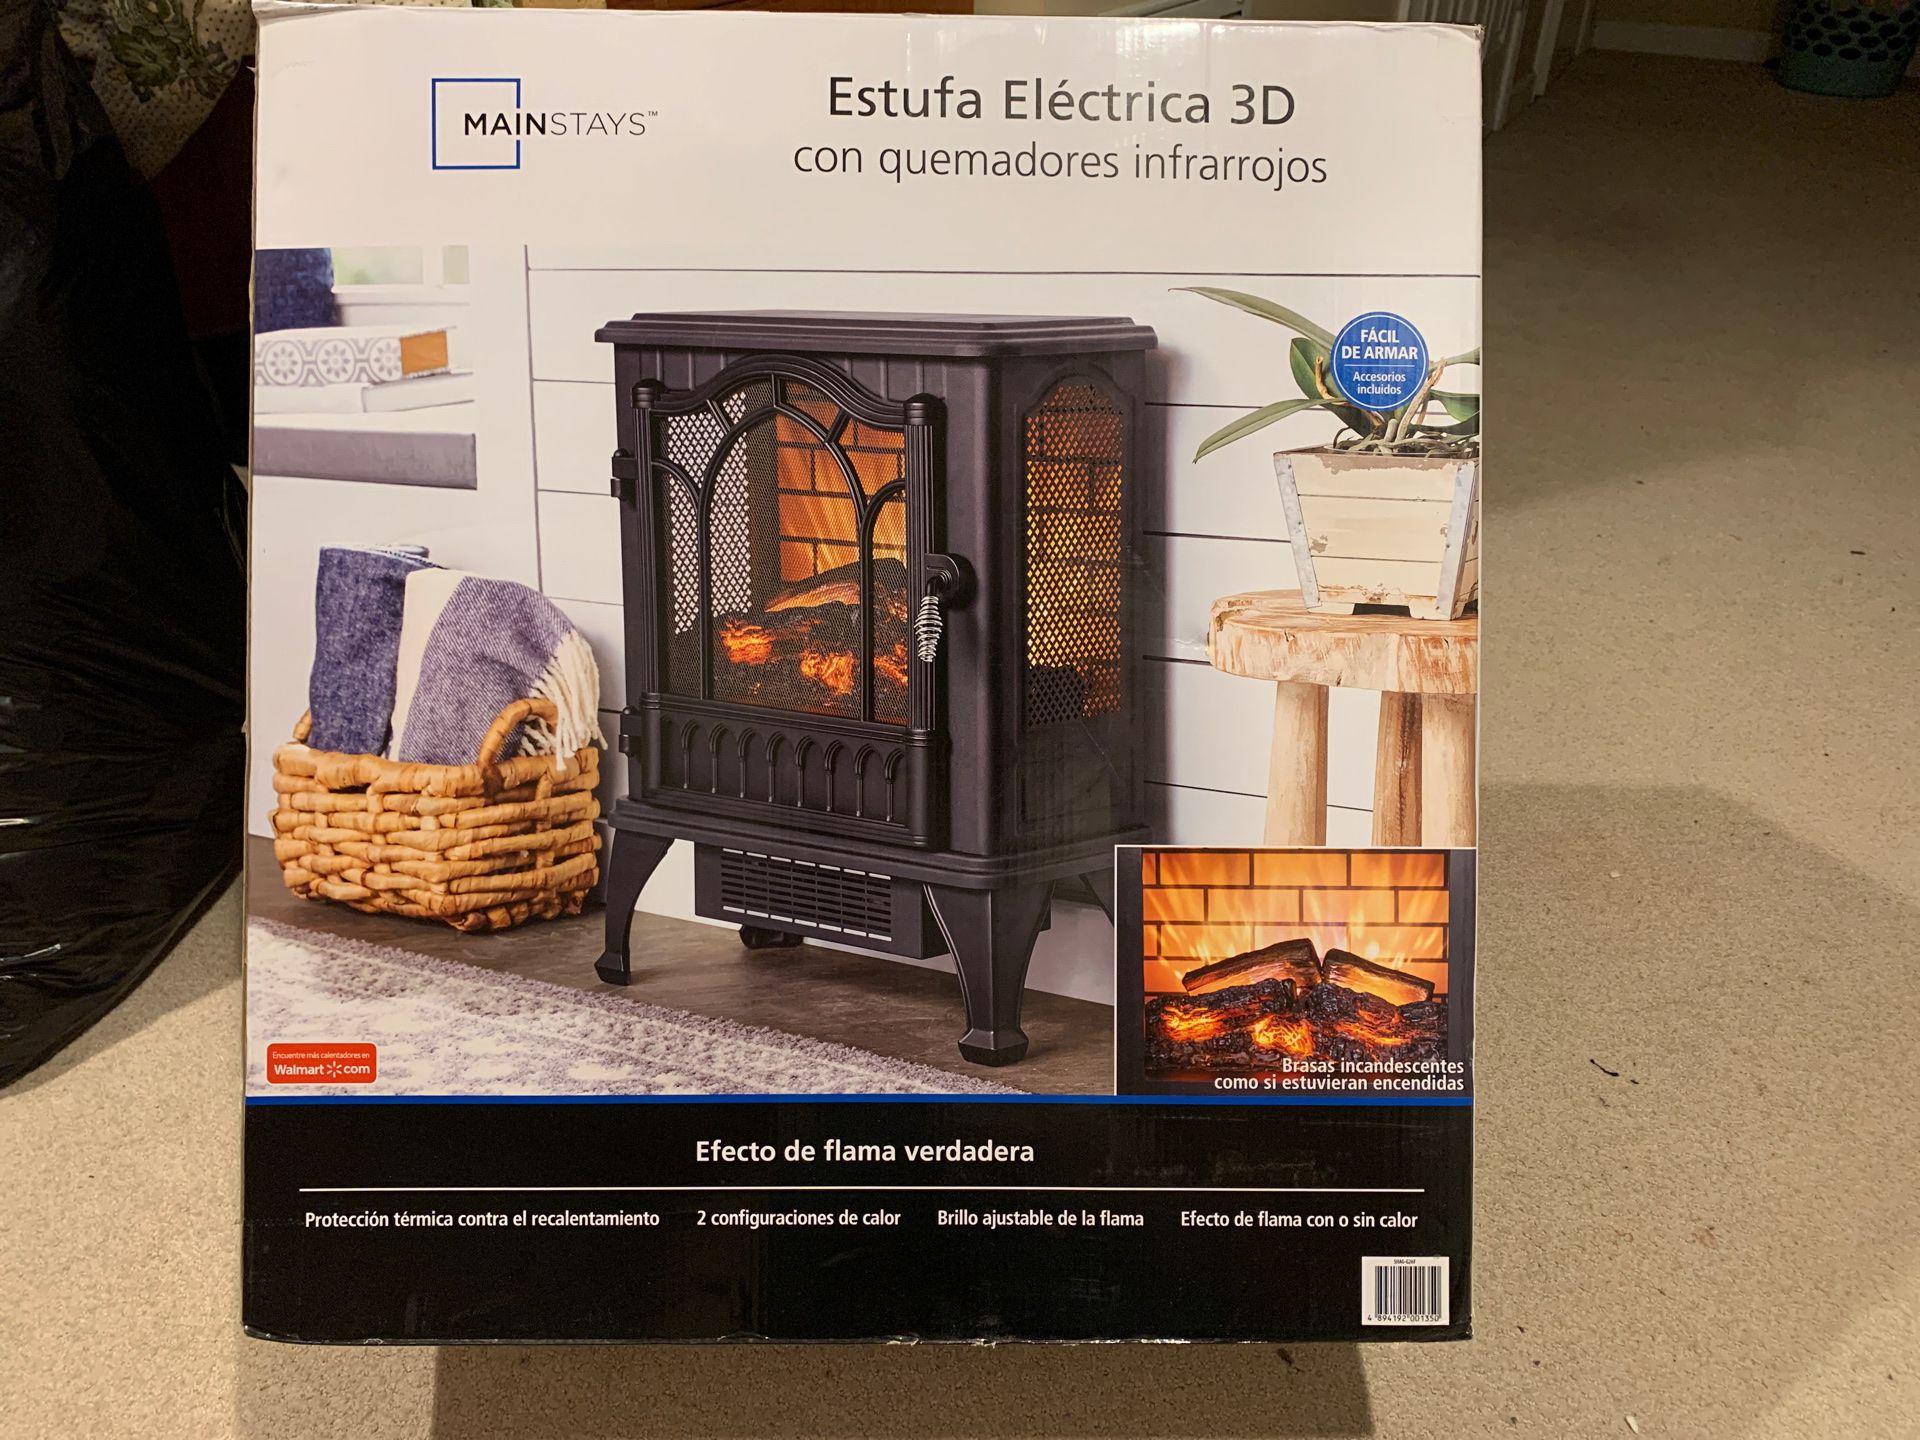 3D Electric stove.